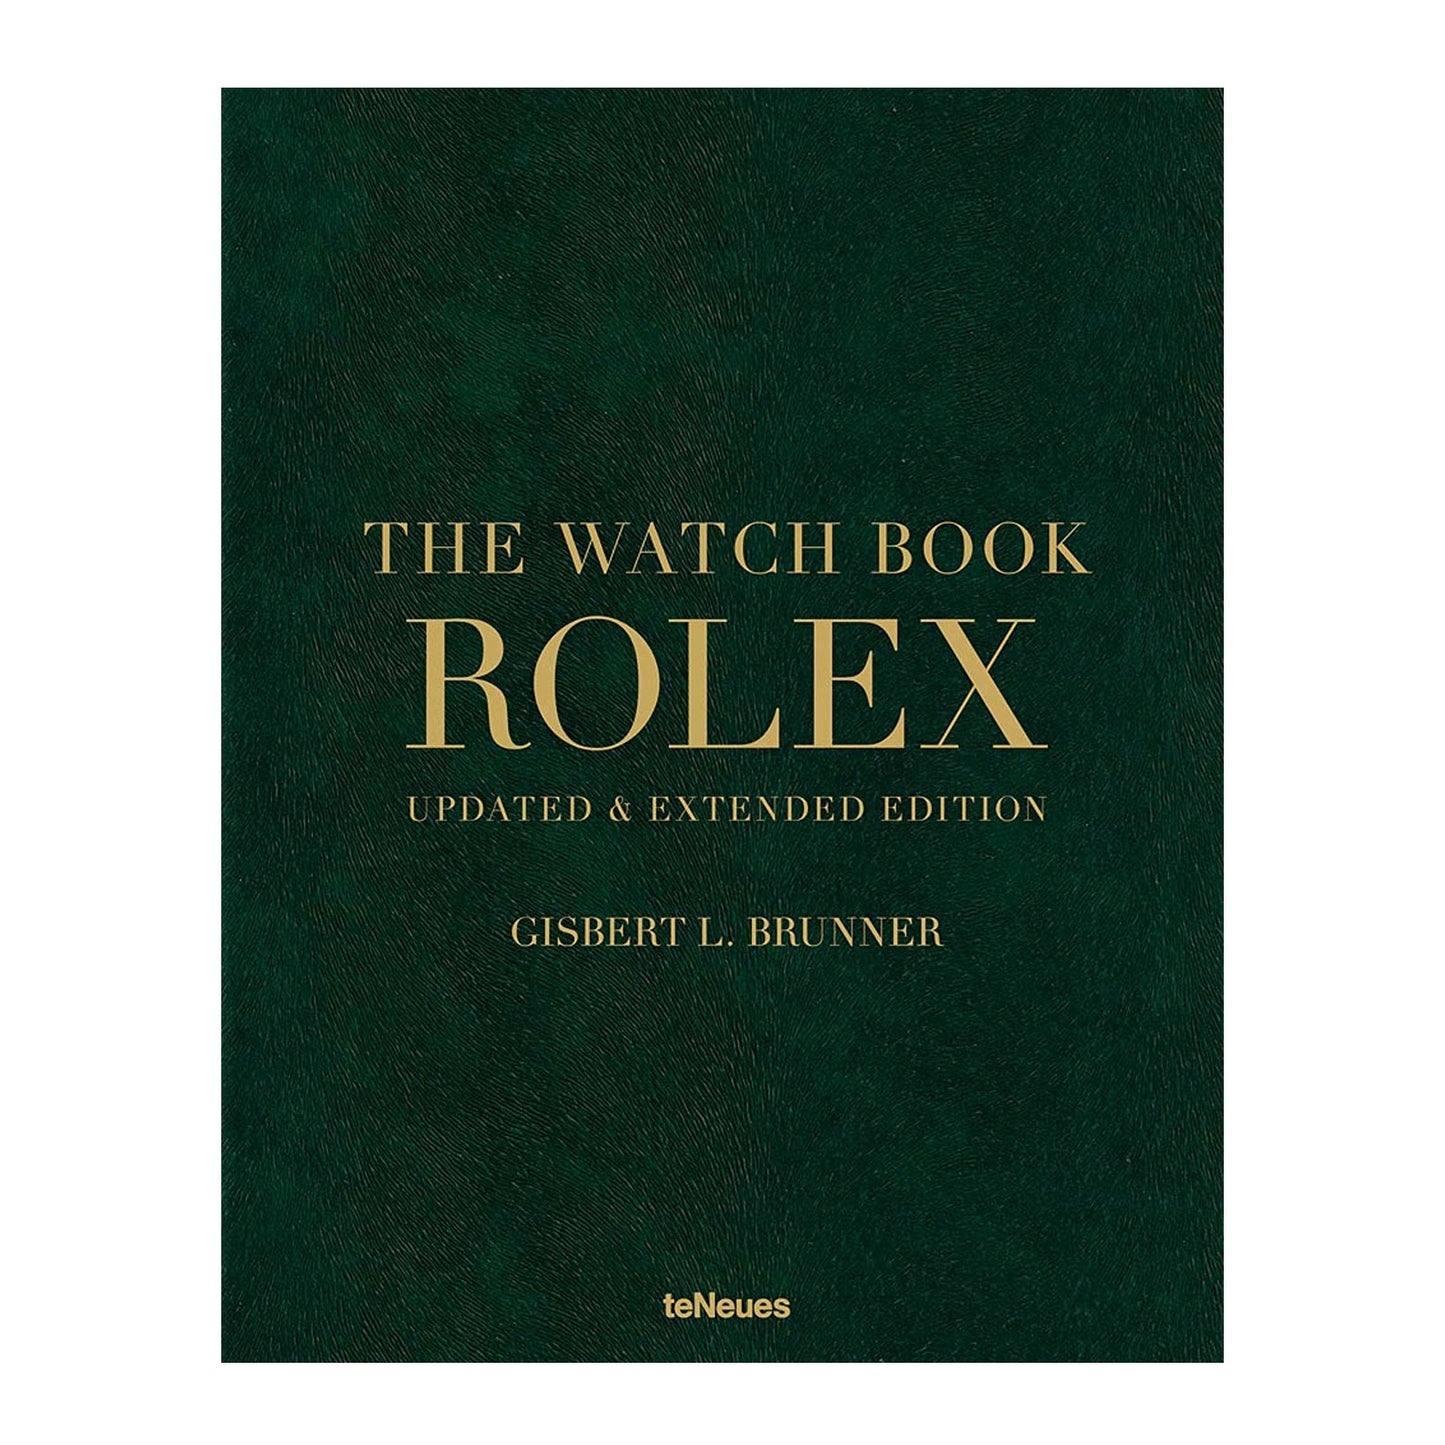 The Watch Book Rolex: Updated & Expanded